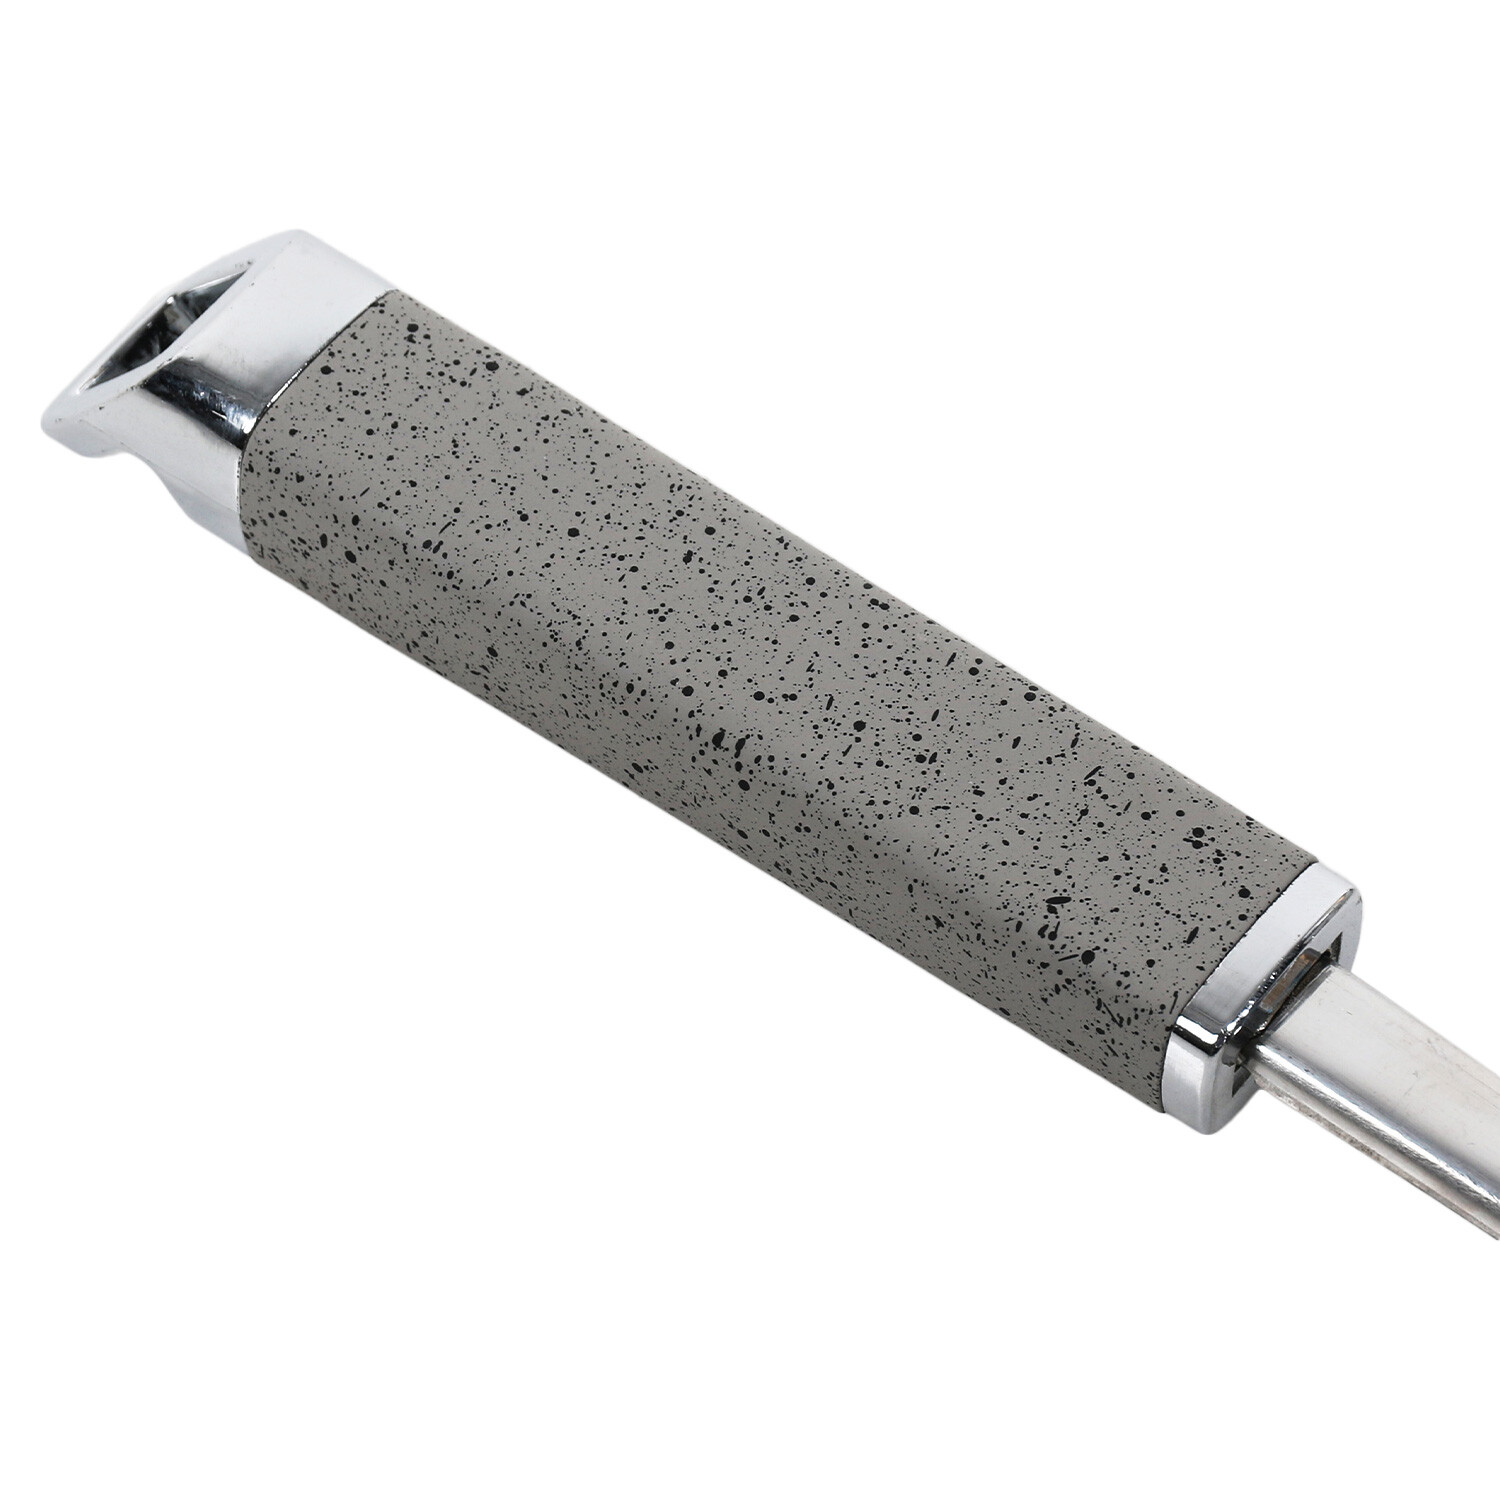 Stainless Steel Slotted Turner with Soft Touch Handle - Grey Image 3